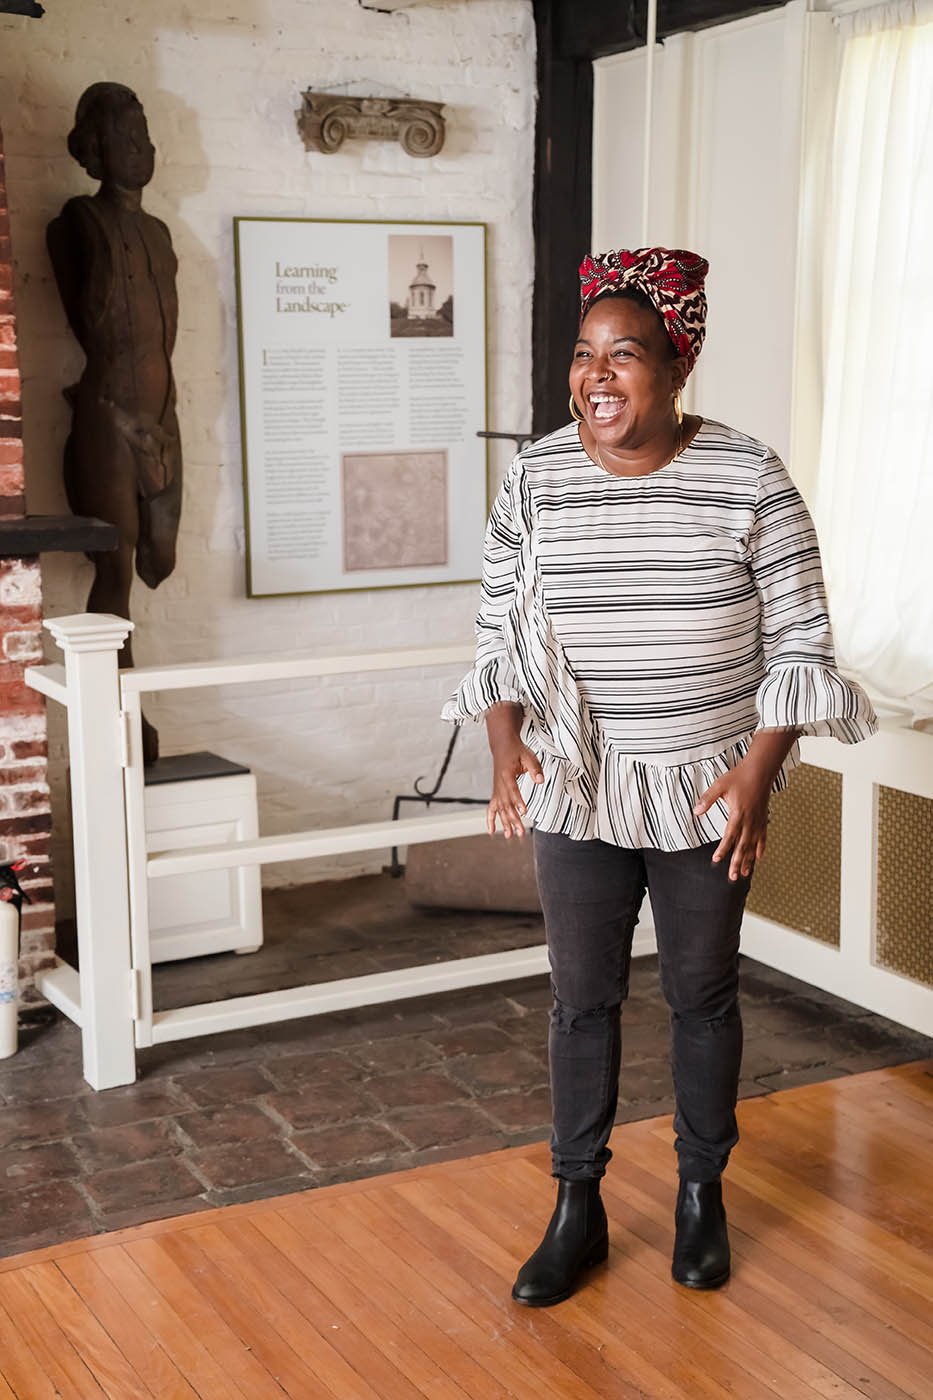 Kyera Singleton at the Royall House and Slave Quarters shot by Nicole Loeb for Macalester College